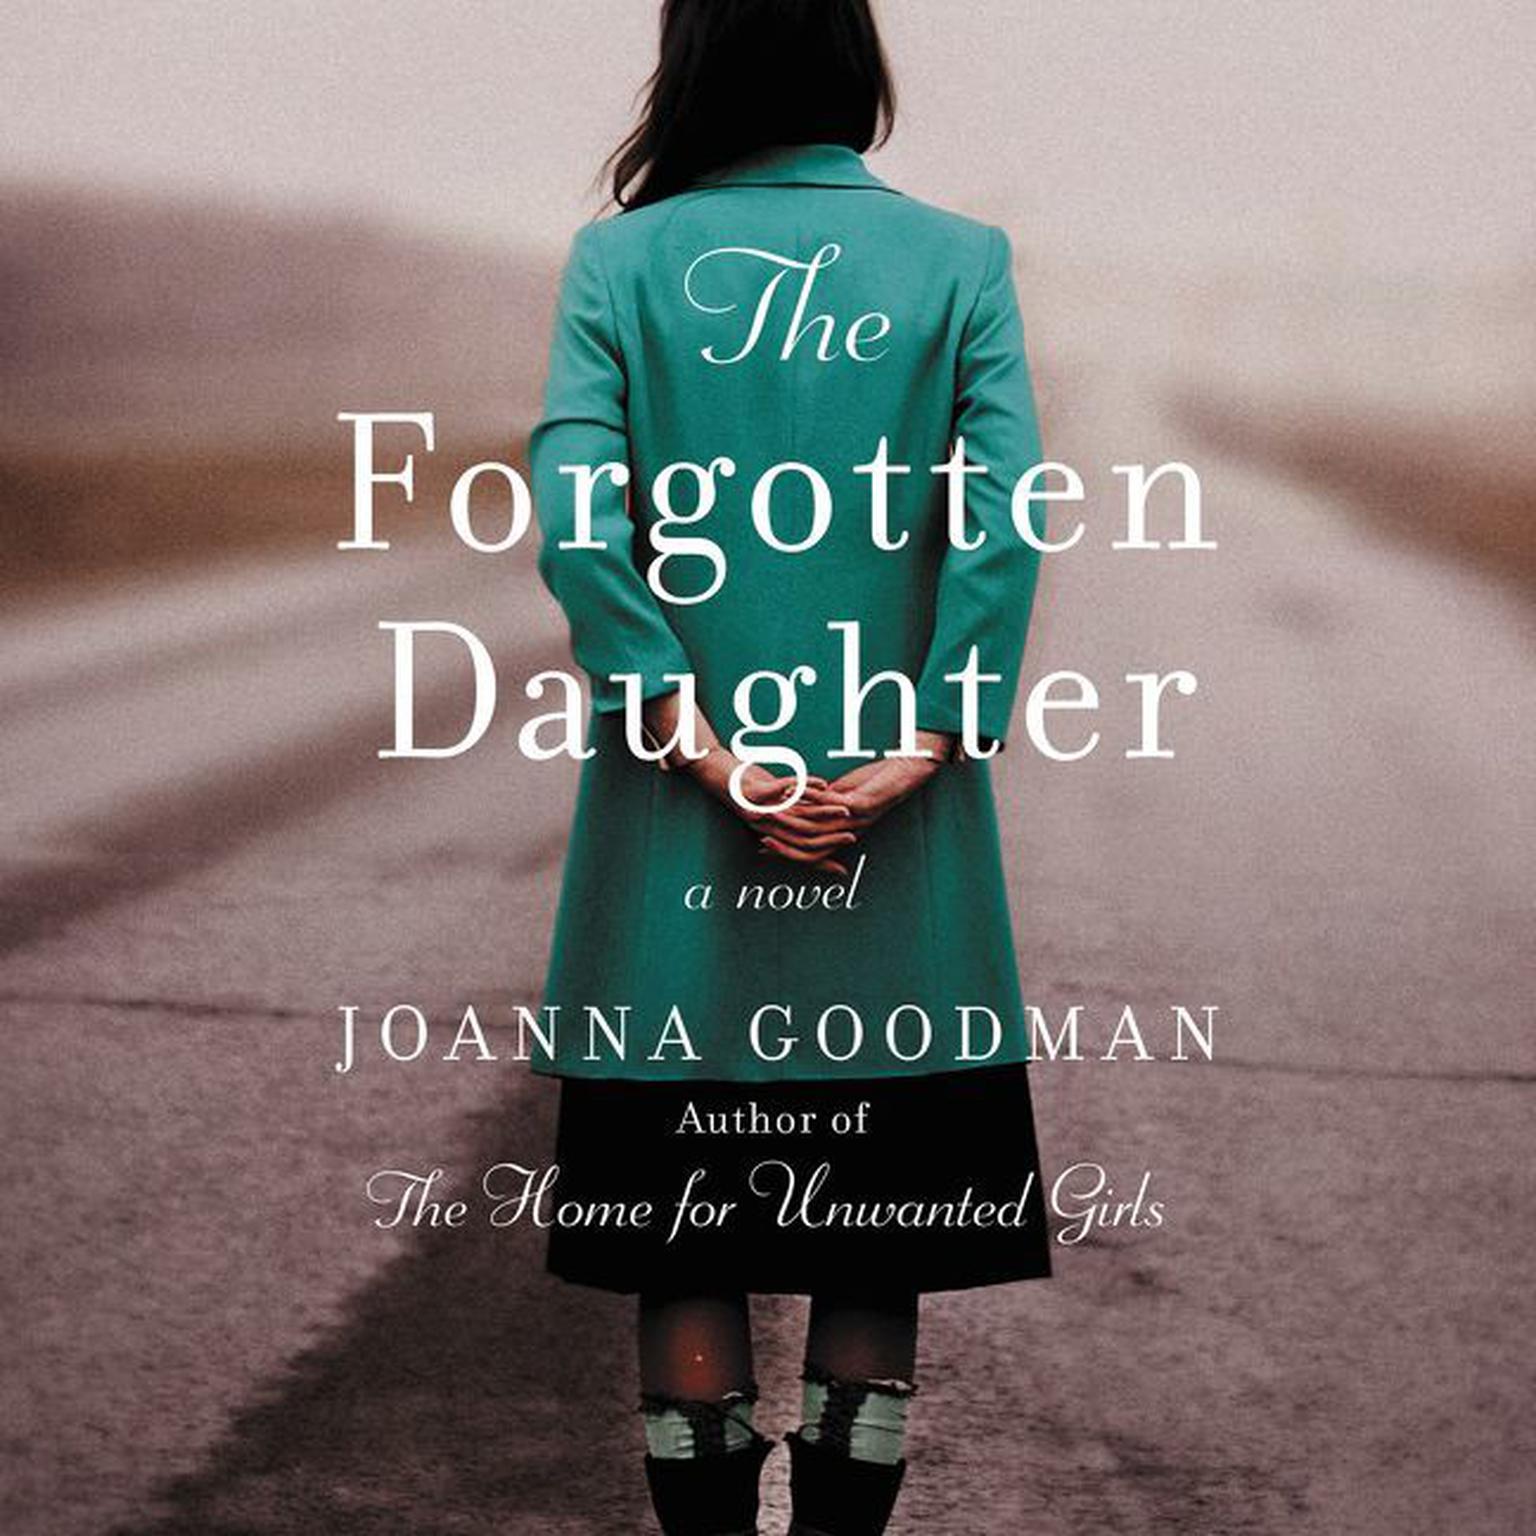 The Forgotten Daughter: The triumphant story of two women divided by their past, but united by friendship-inspired by true events Audiobook, by Joanna Goodman